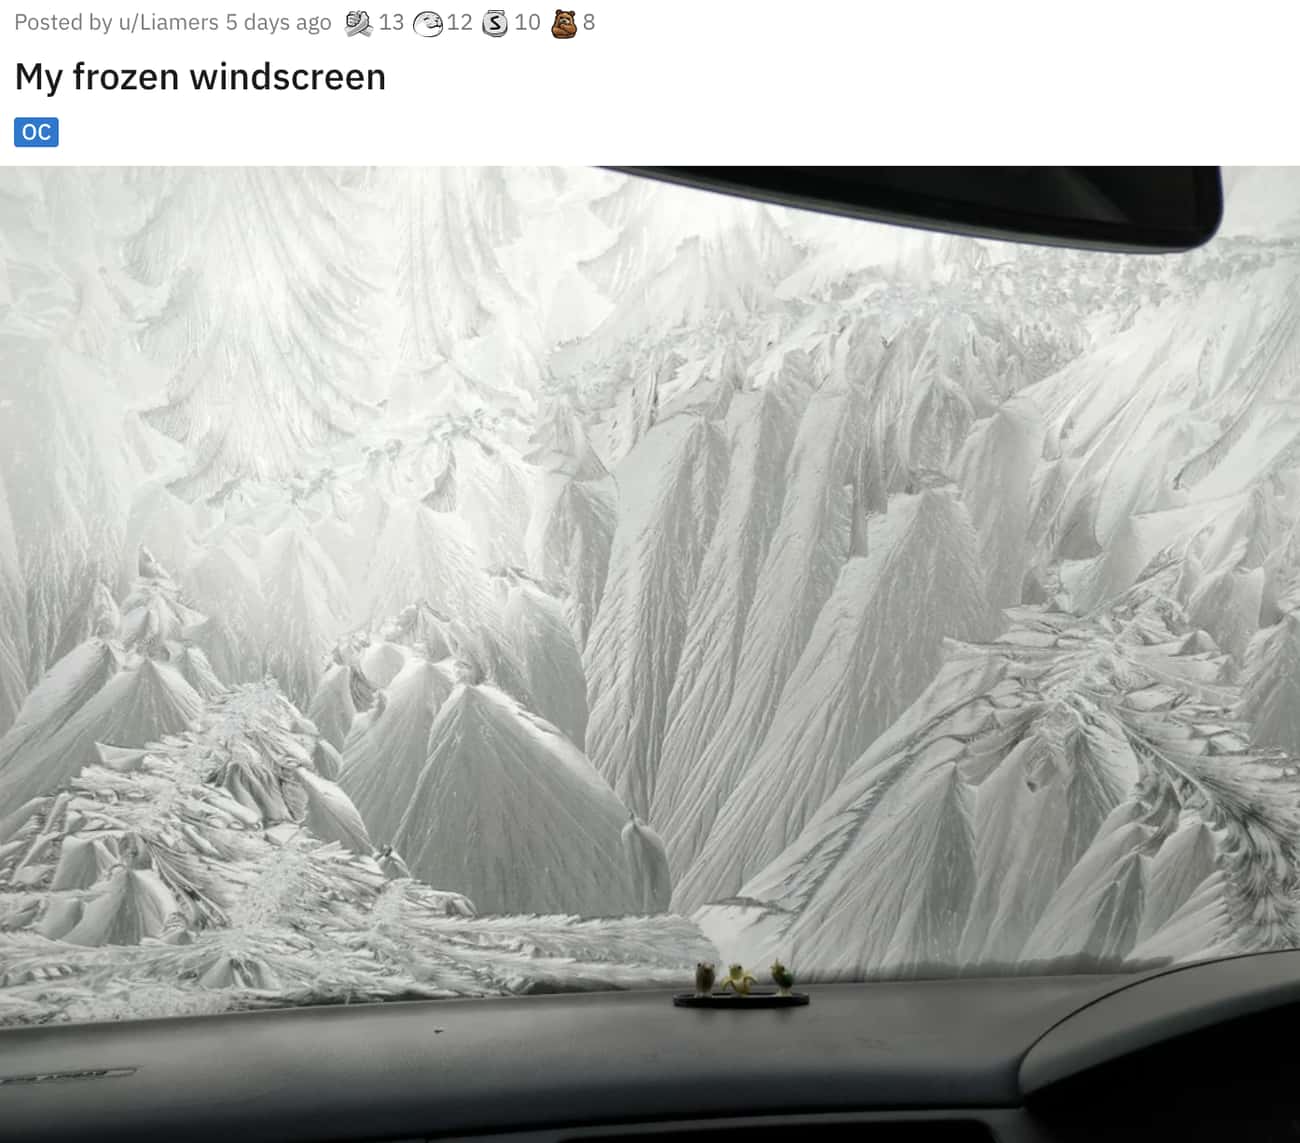 Just A Car's Window, Not A Scenic Shot